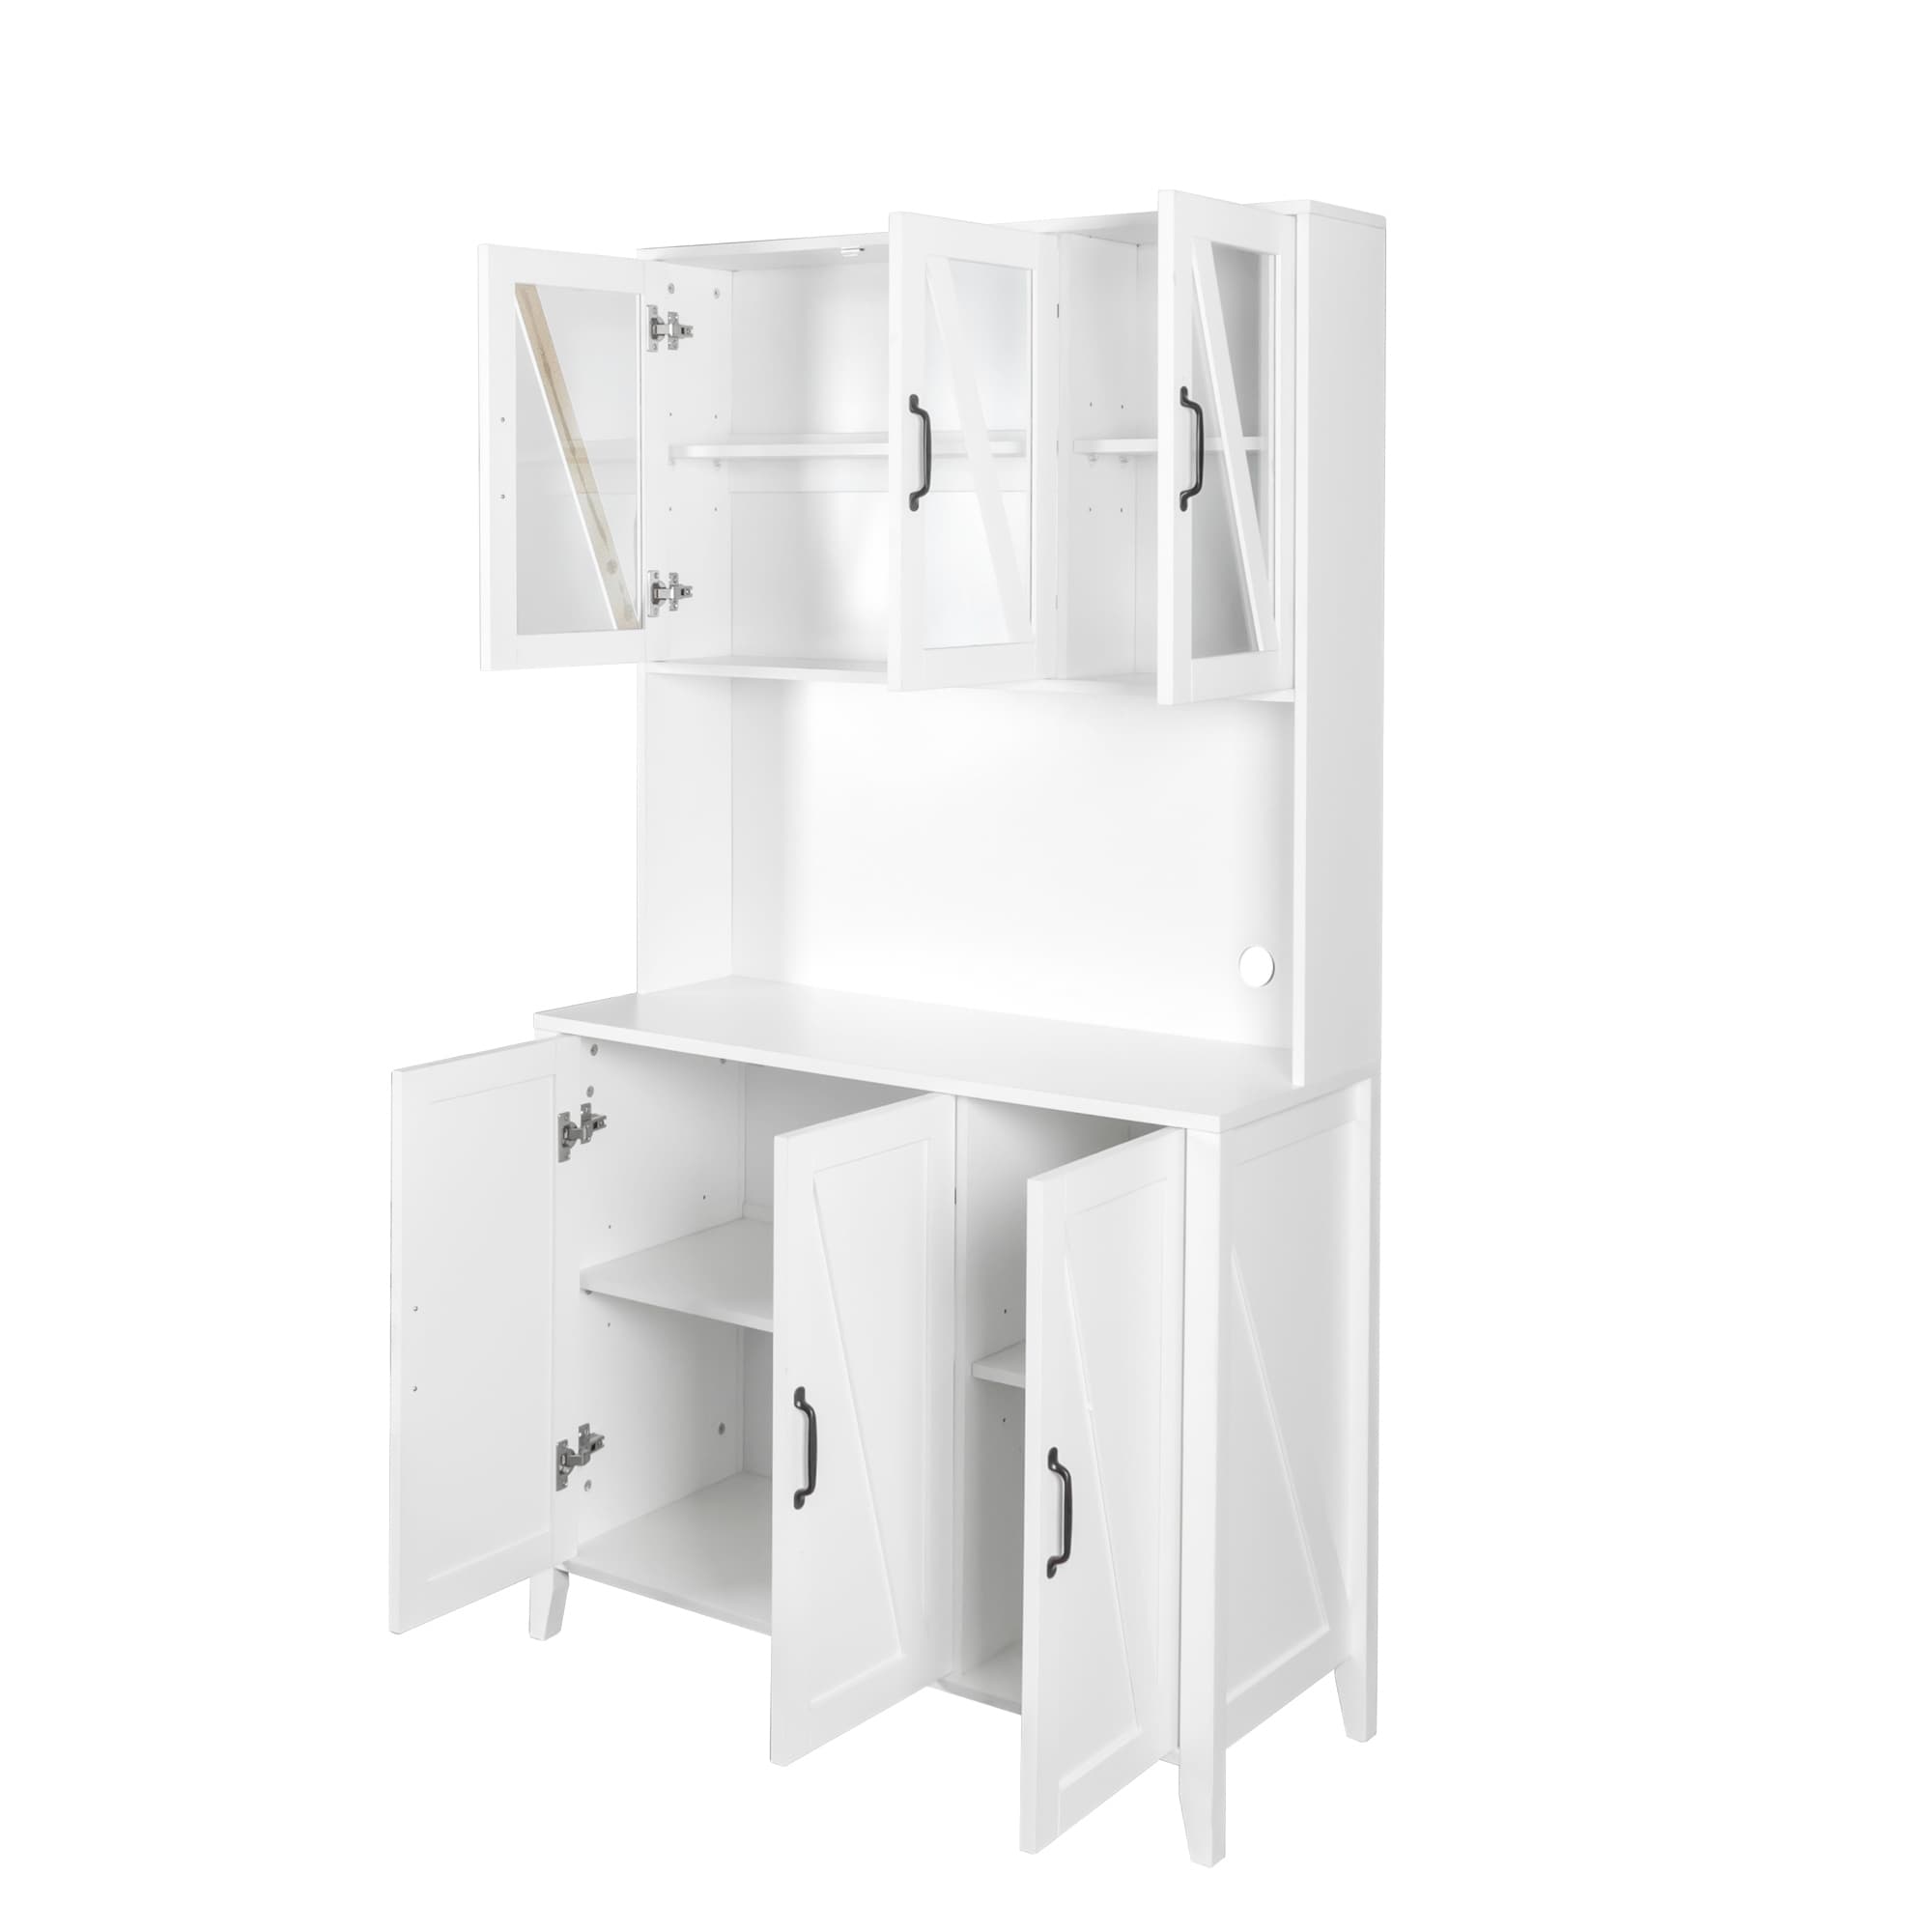 https://ak1.ostkcdn.com/images/products/is/images/direct/7088738ede1bcde17e6be7b80a9548254aec4ea8/Large-Kitchen-Pantry-Storage-Cabinet-with-Glass-Doors%2C-Drawers-%26-Open-Shelves%2C-Freestanding-Kitchen-Cupboard-Buffet-Cabinet.jpg